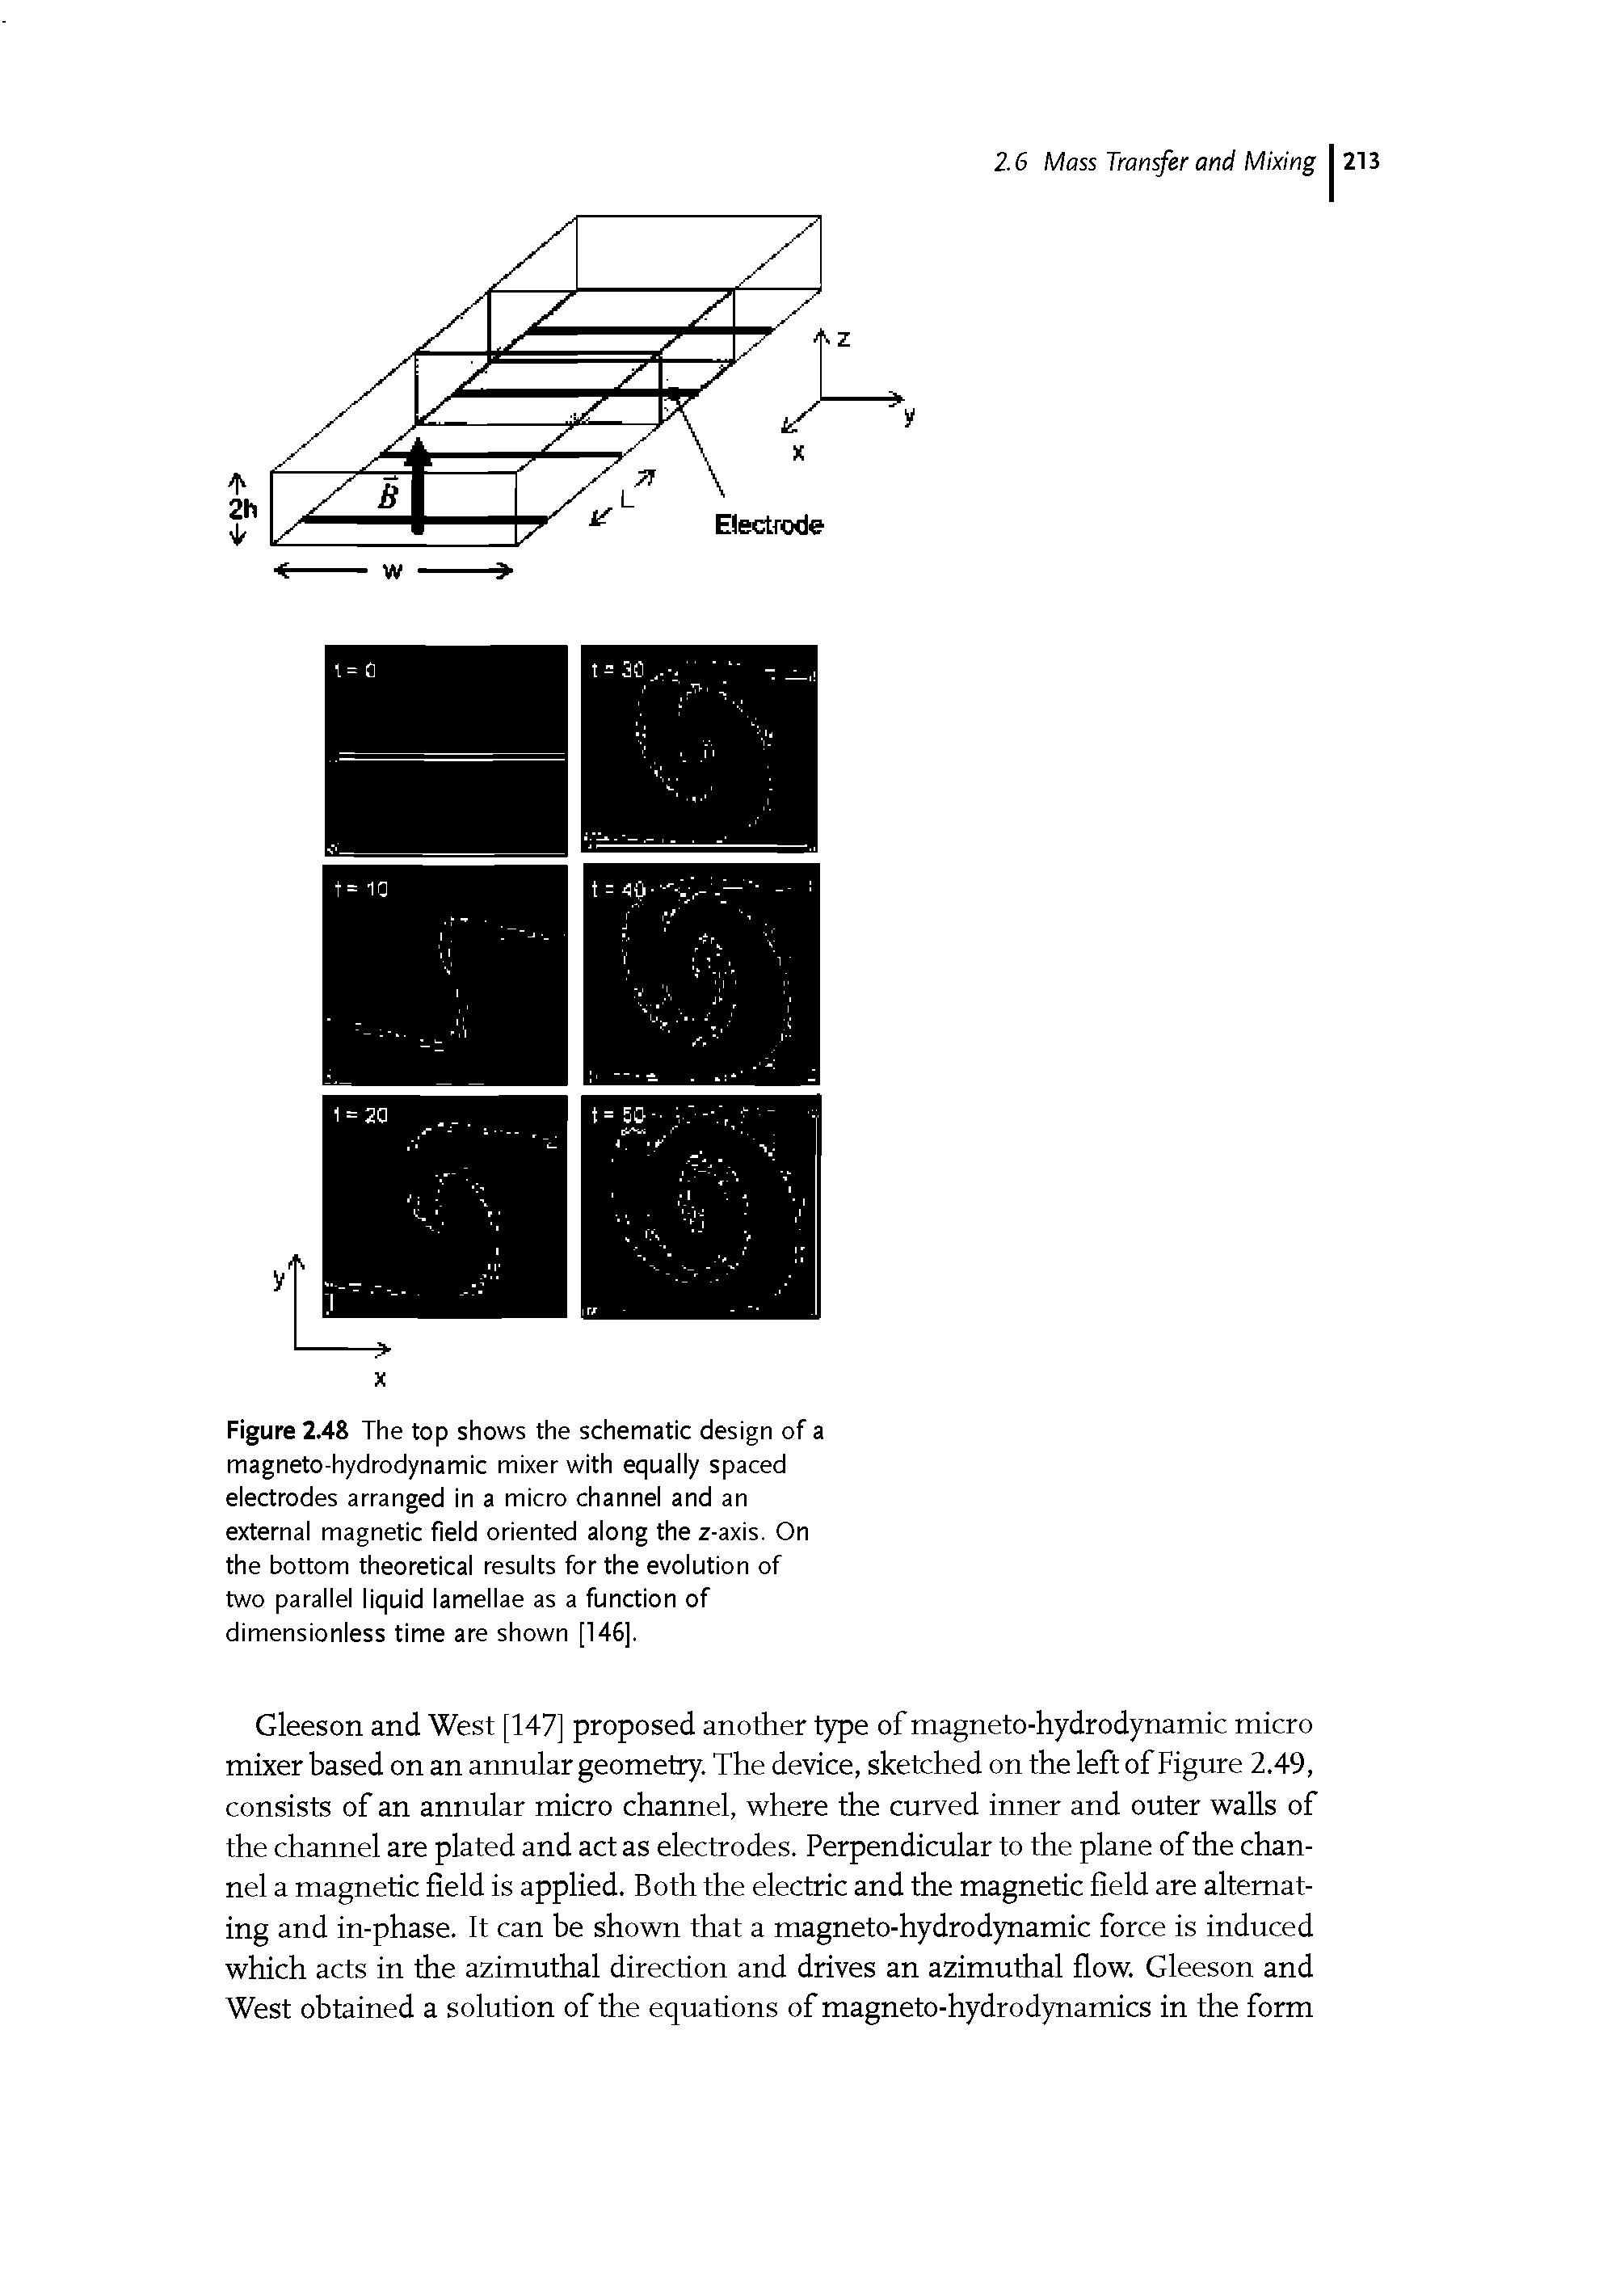 Figure 2.48 The top shows the schematic design of a magneto-hydrodynamic mixer with equally spaced electrodes arranged In a micro channel and an external magnetic field oriented along the z-axis. On the bottom theoretical results for the evolution of two parallel liquid lamellae as a function of dimensionless time are shown [146].